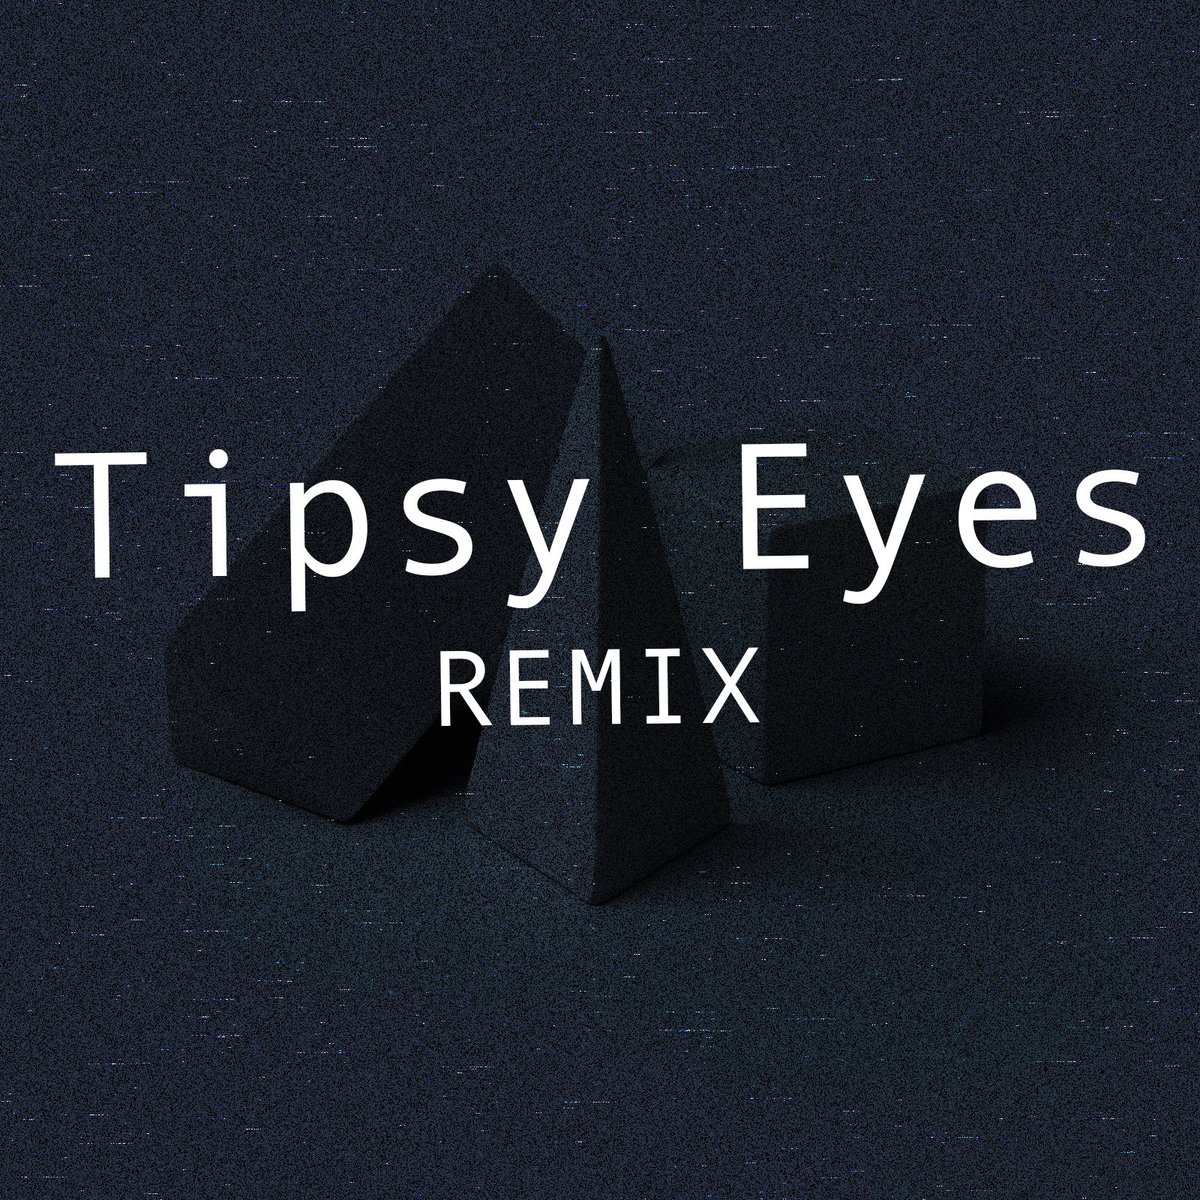 Ricochet Remix by Tipsy Eyes OUT TODAY 

We are thrilled to announce that the brilliant producer and remixer Matt Smith (aka @TipsyEyes101)  has created an incredible re-imagining of our song 'Ricochet.' Go give it a spin 🎧 

open.spotify.com/track/4BlKtA8U…